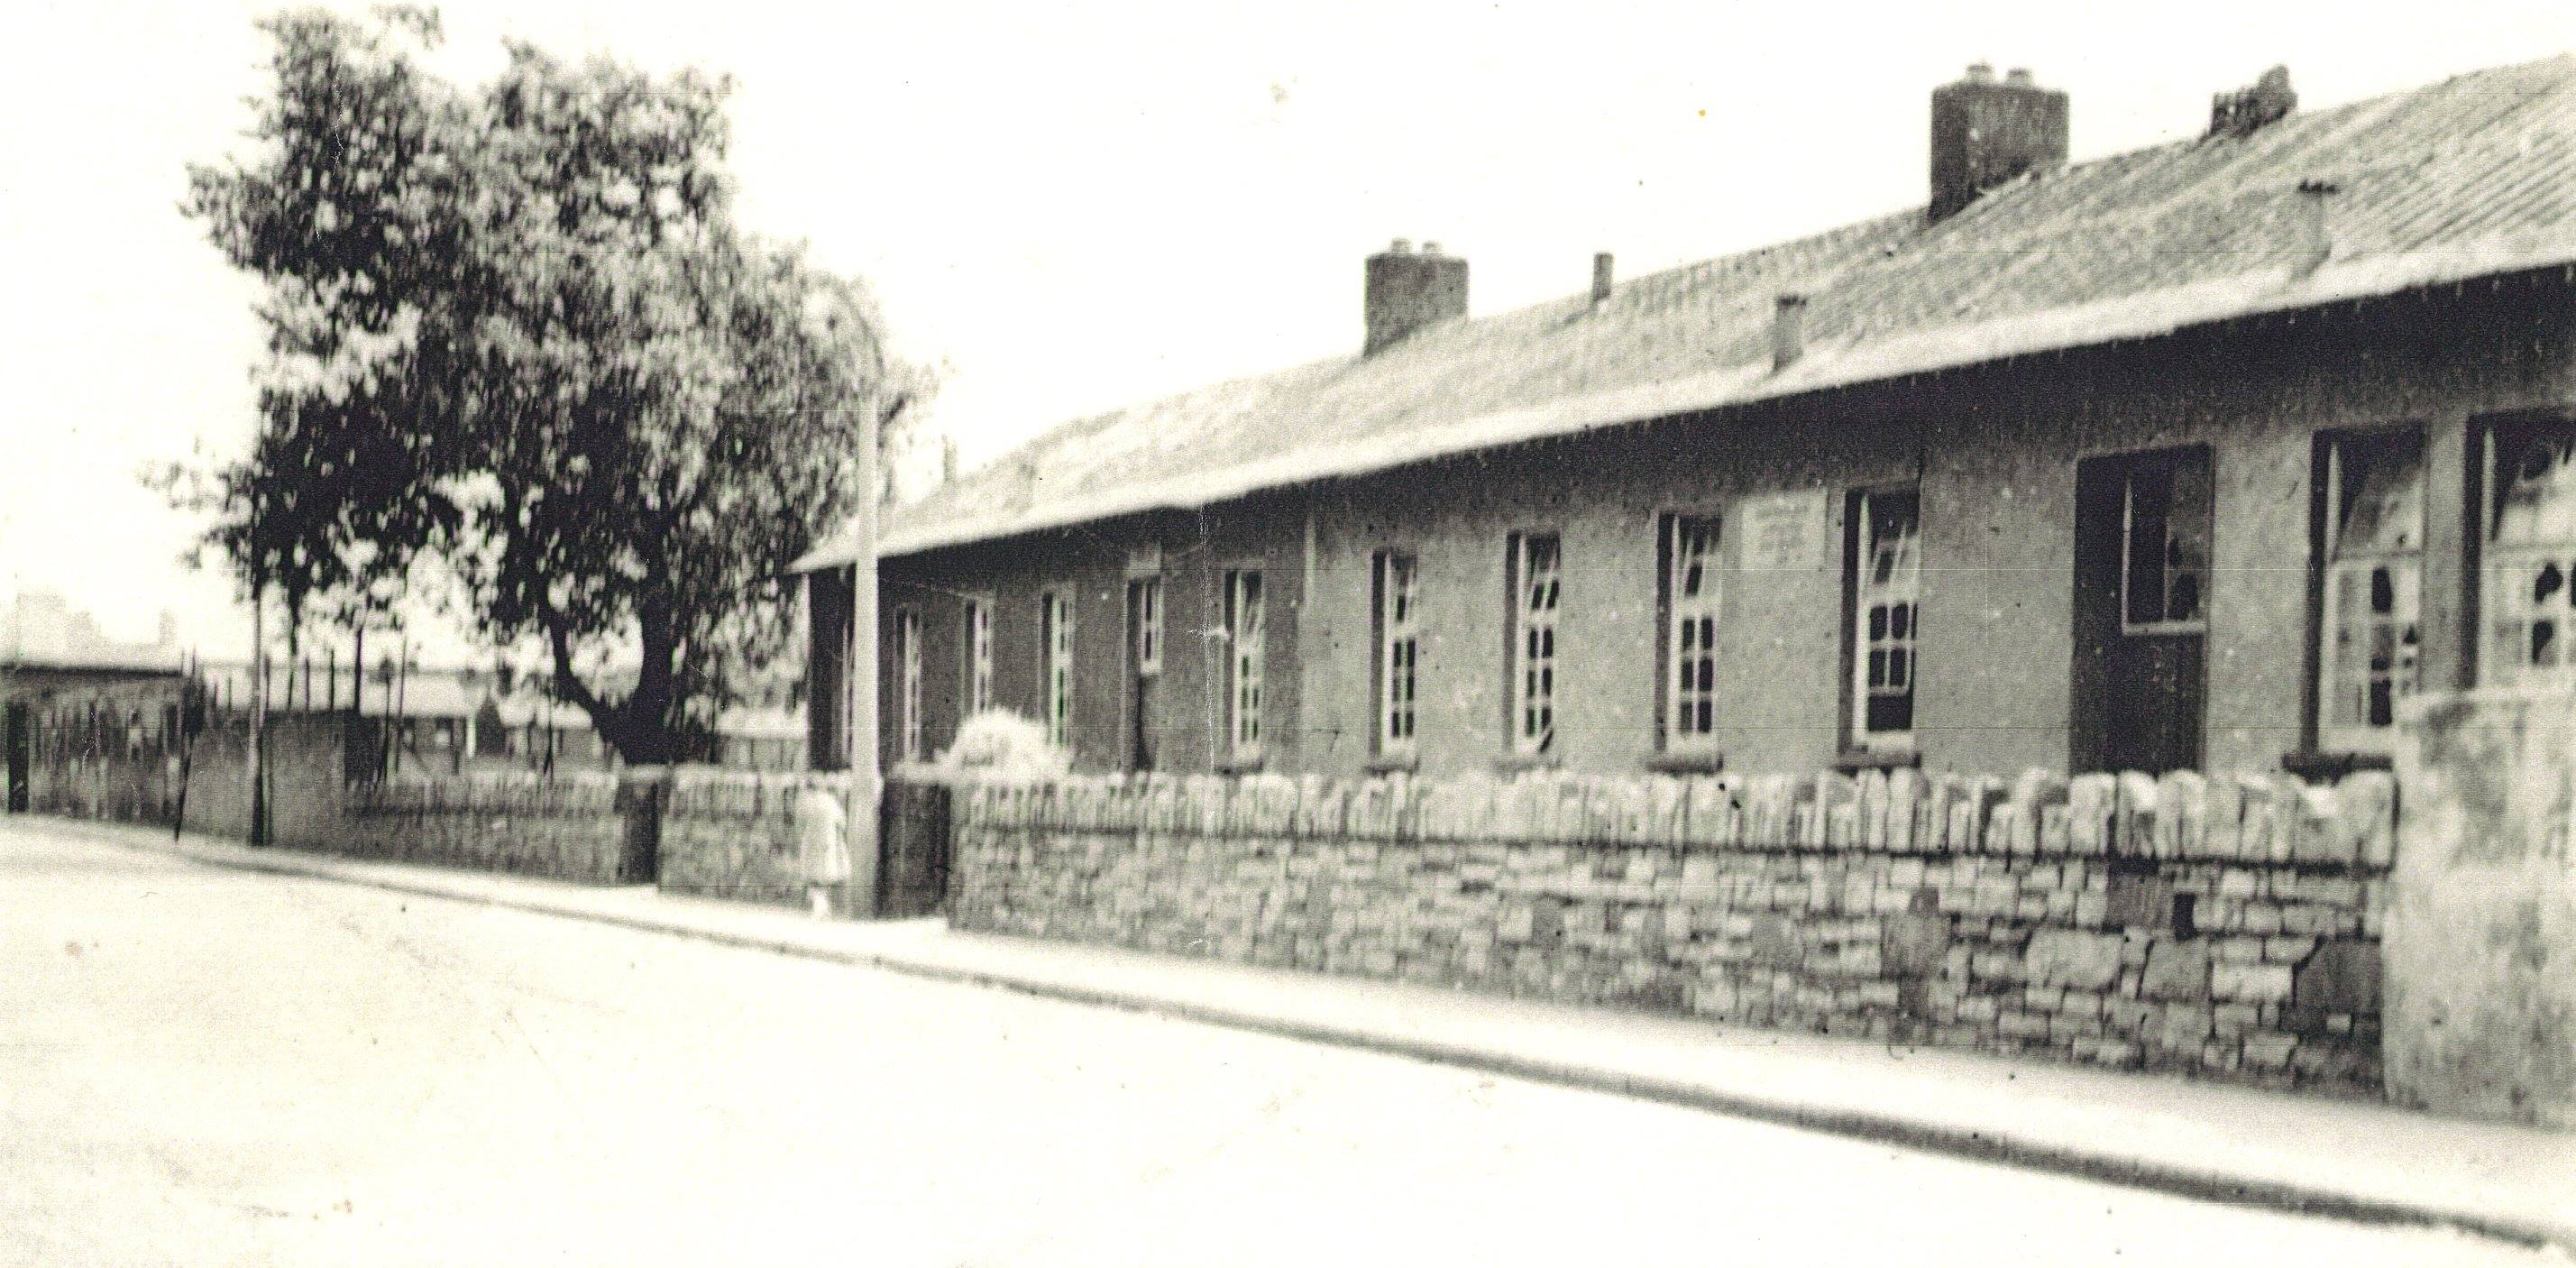 School on East Wall Road (current location of St Josephs Co-ed)